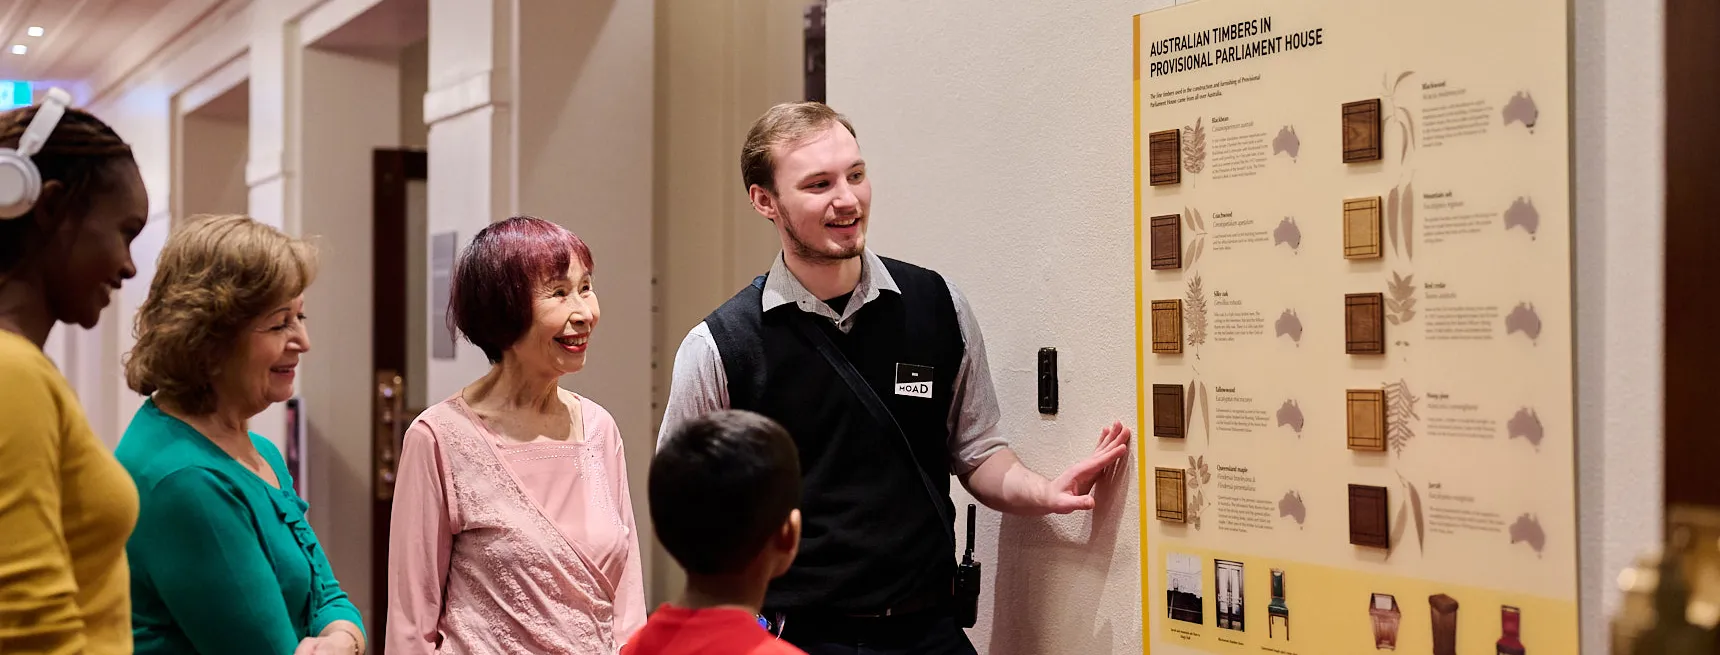 A Museum staff member and a group of people in brightly coloured tops stand in a hallway with red carpet looking at a board displaying Australian timbers used in Old Parliament House.